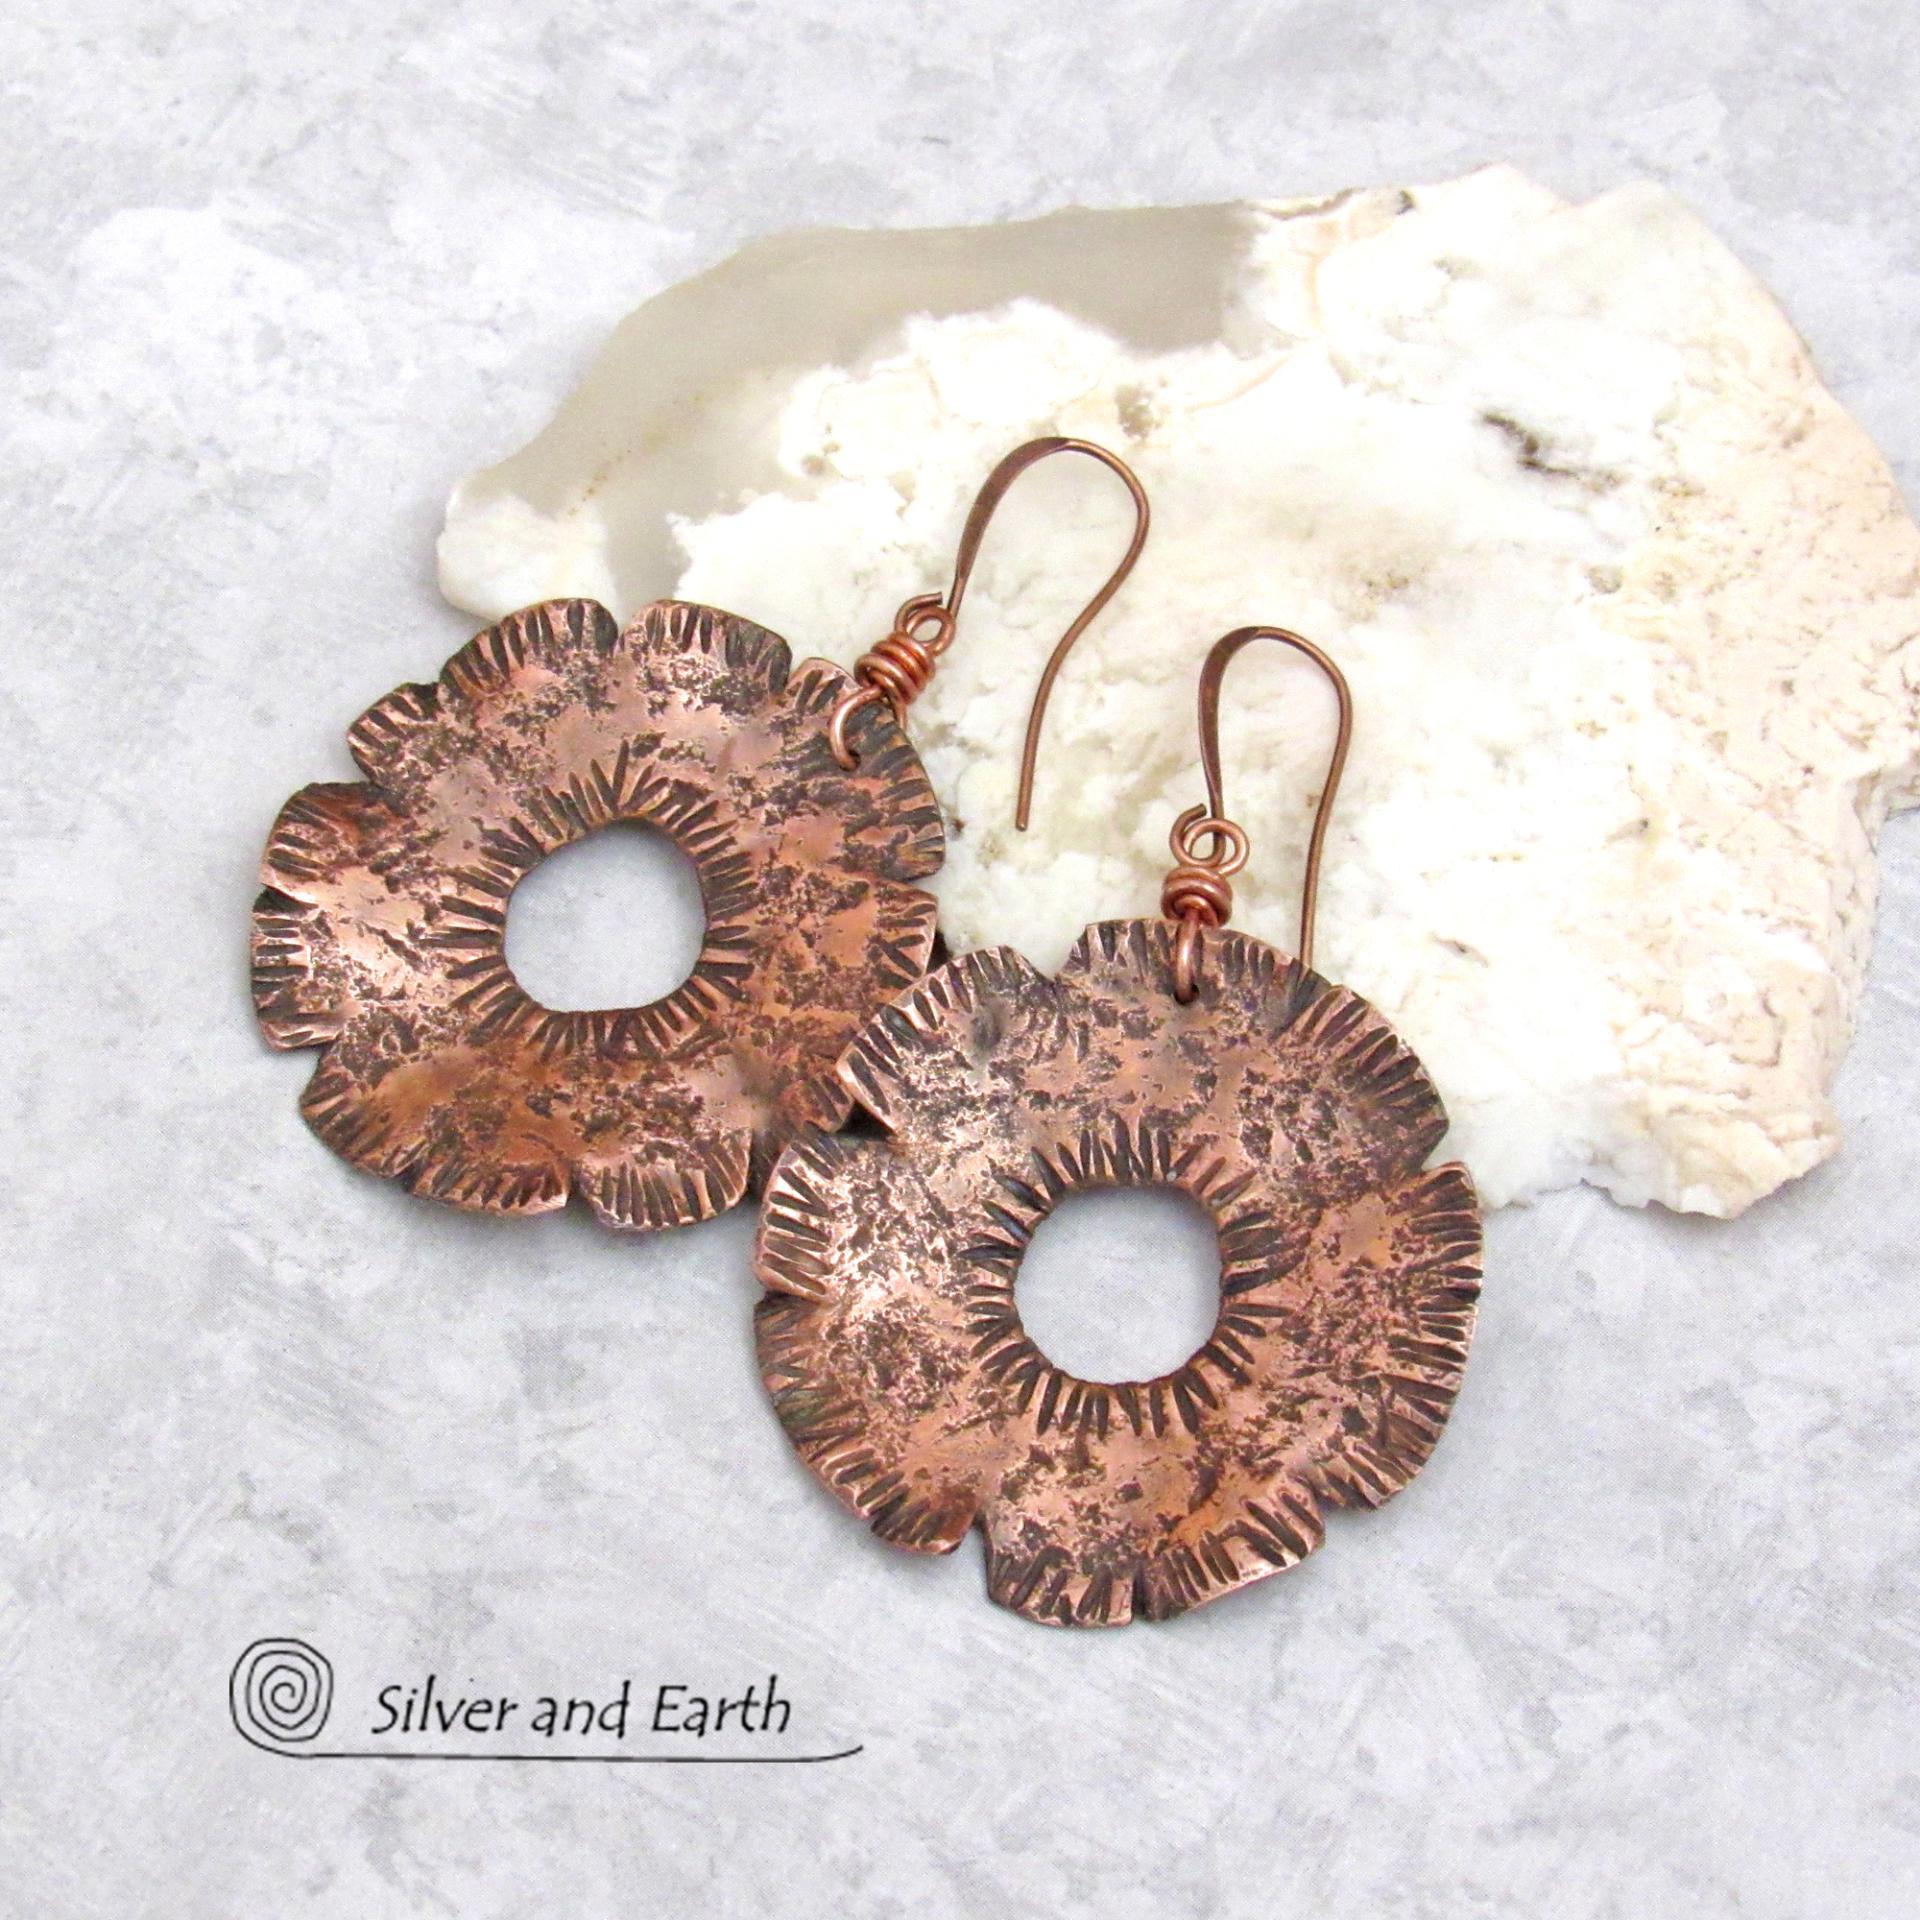 Big Bold Copper Earrings with Organic Hammered Texture - Hand Forged Edgy Modern Metal Jewelry